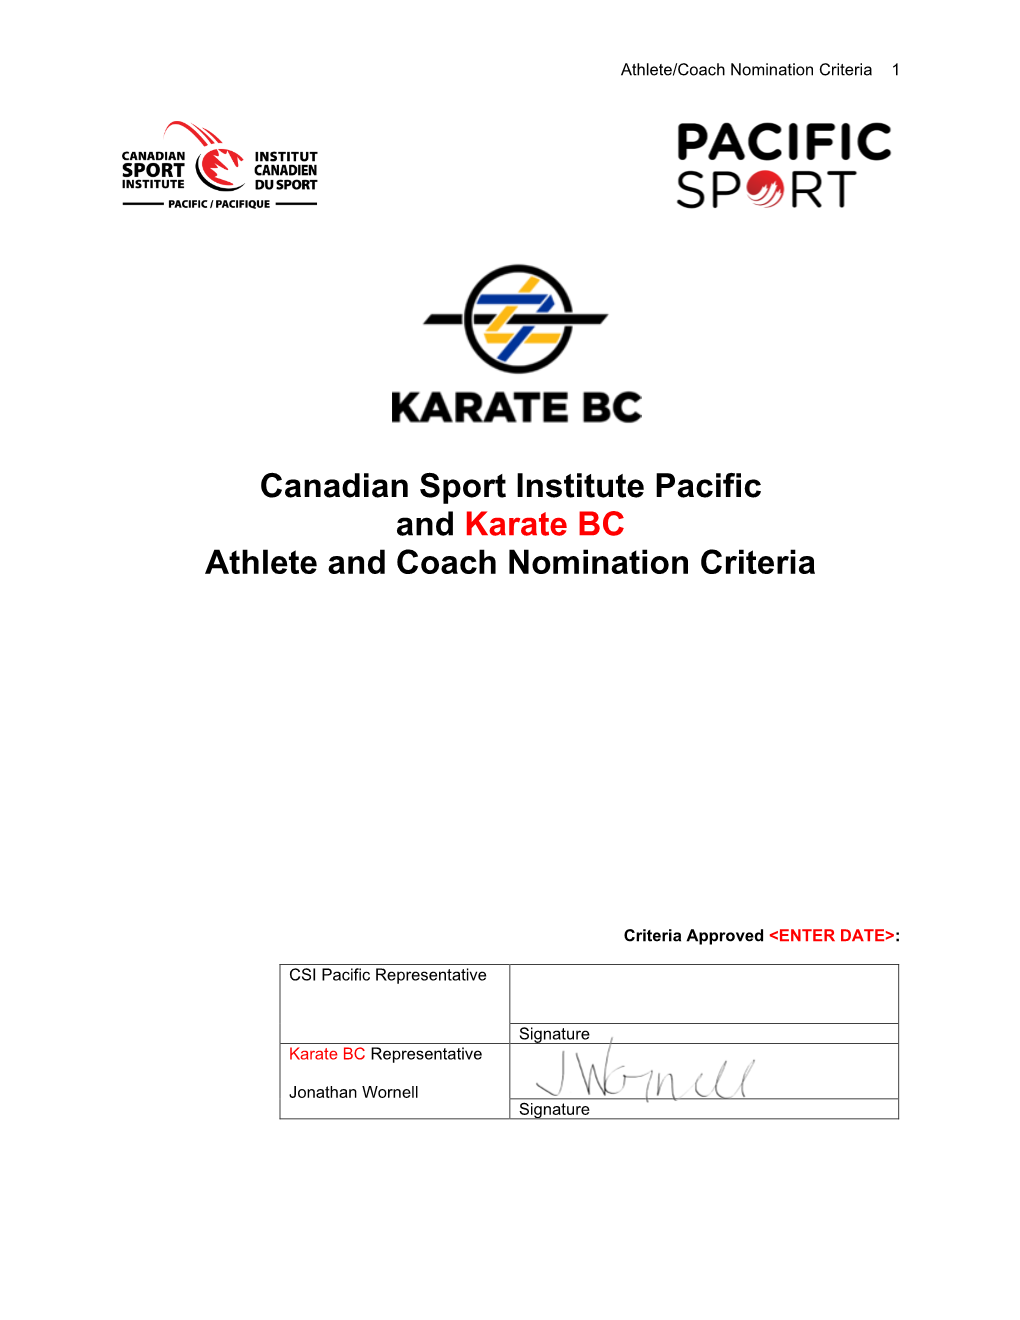 Canadian Sport Institute Pacific and Karate BC Athlete and Coach Nomination Criteria